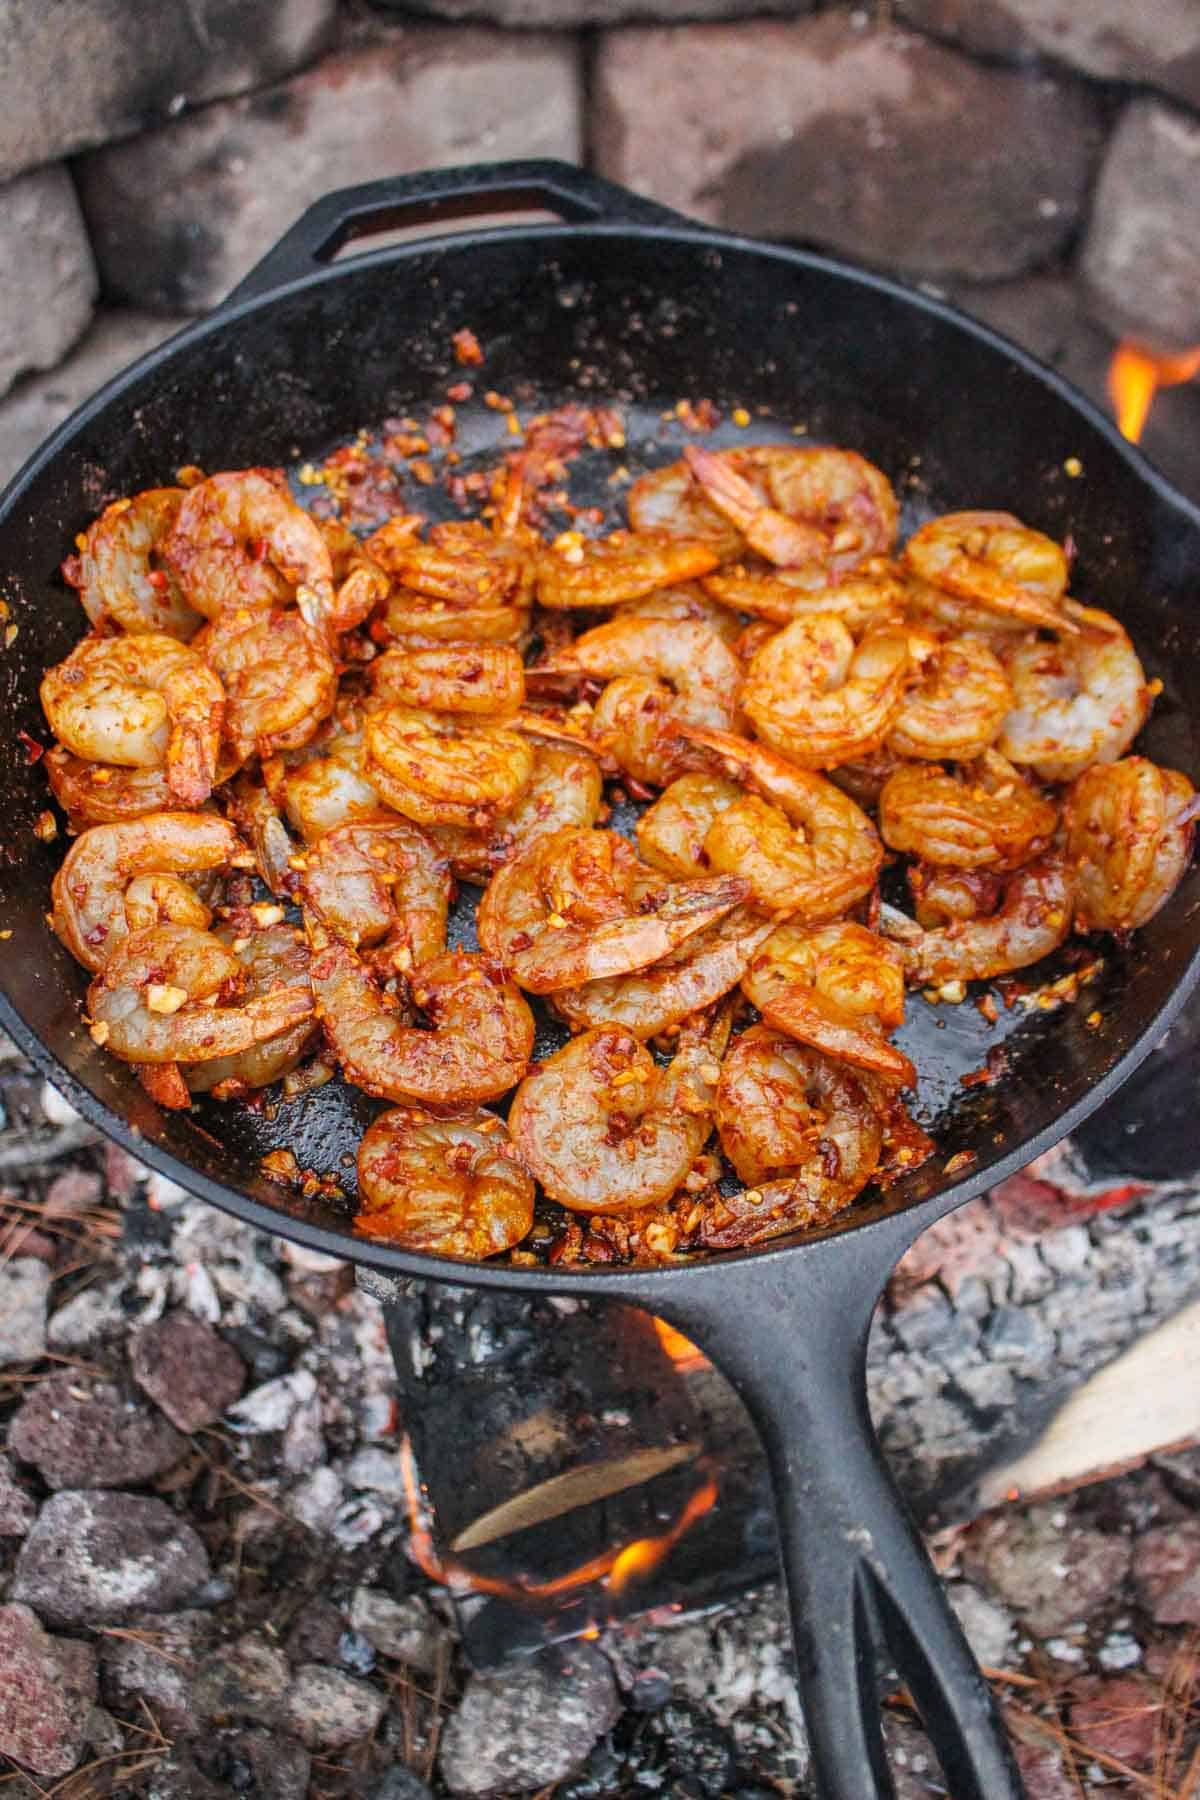 Adding the raw, seasoned shrimp to the skillet to cook.